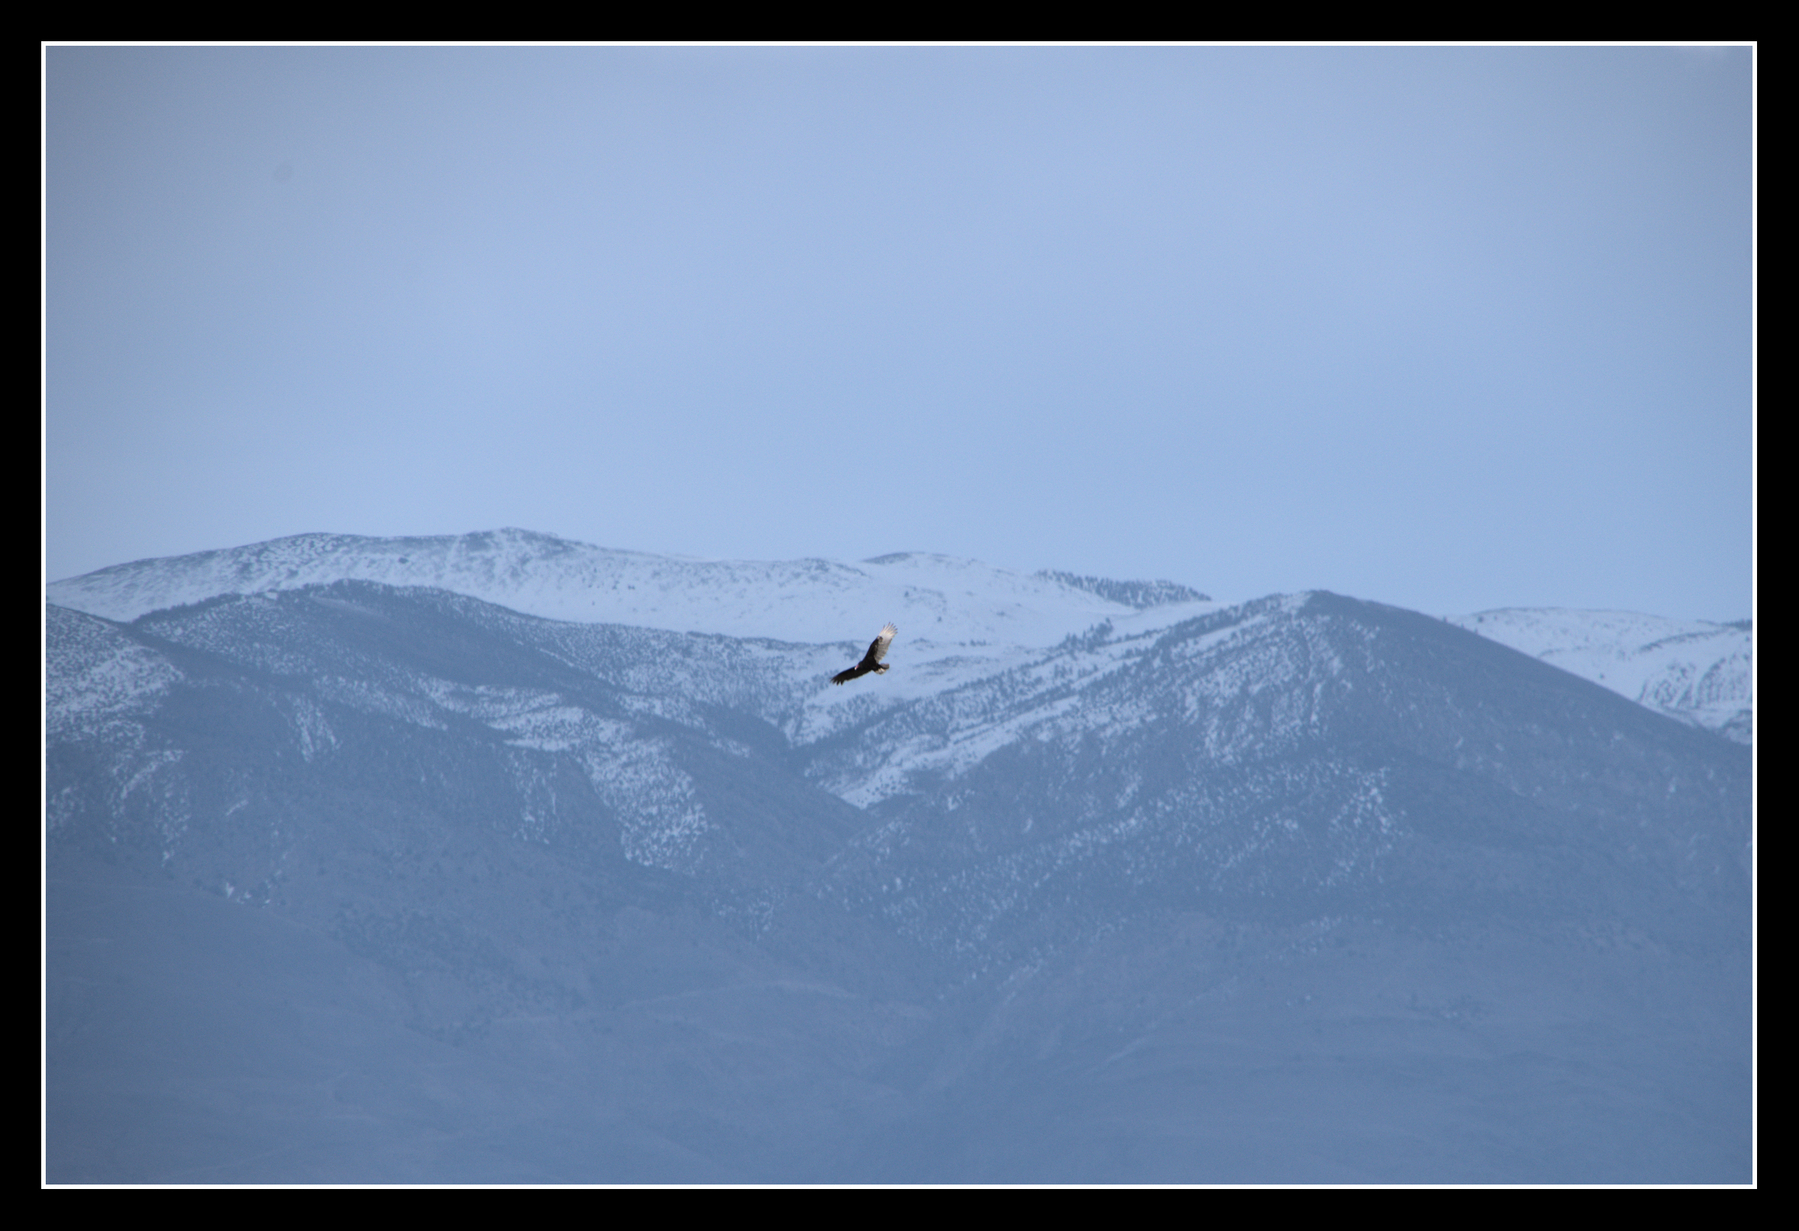 A turkey vulture is soaring in the sky, small against a distant mountain range.